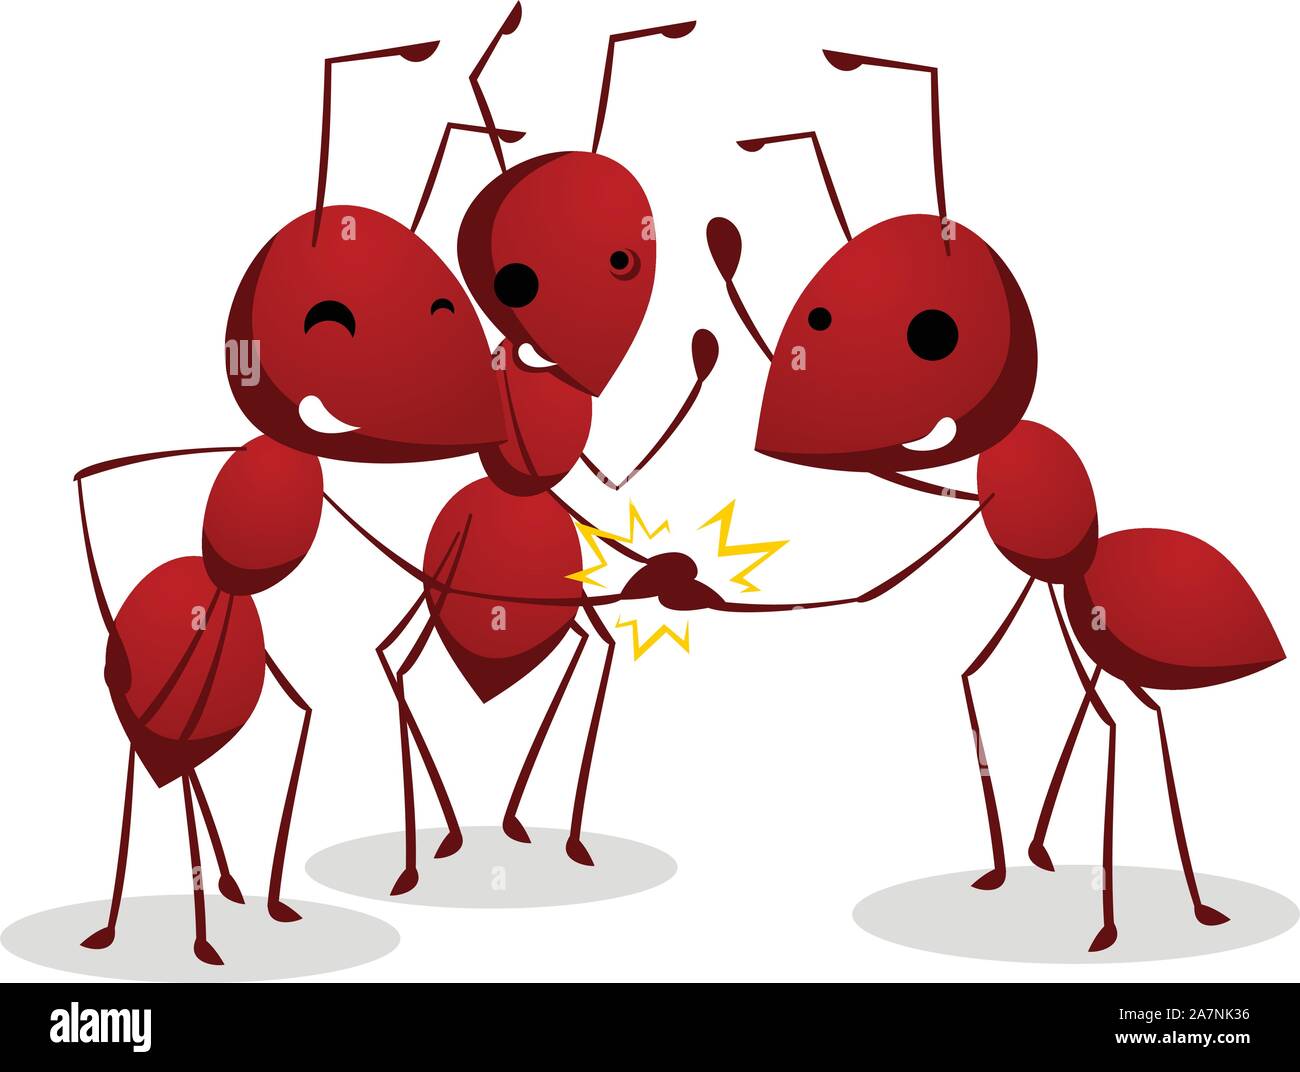 Three Ants team shaking teamwork hands, with three brown ants vector illustration. Stock Vector